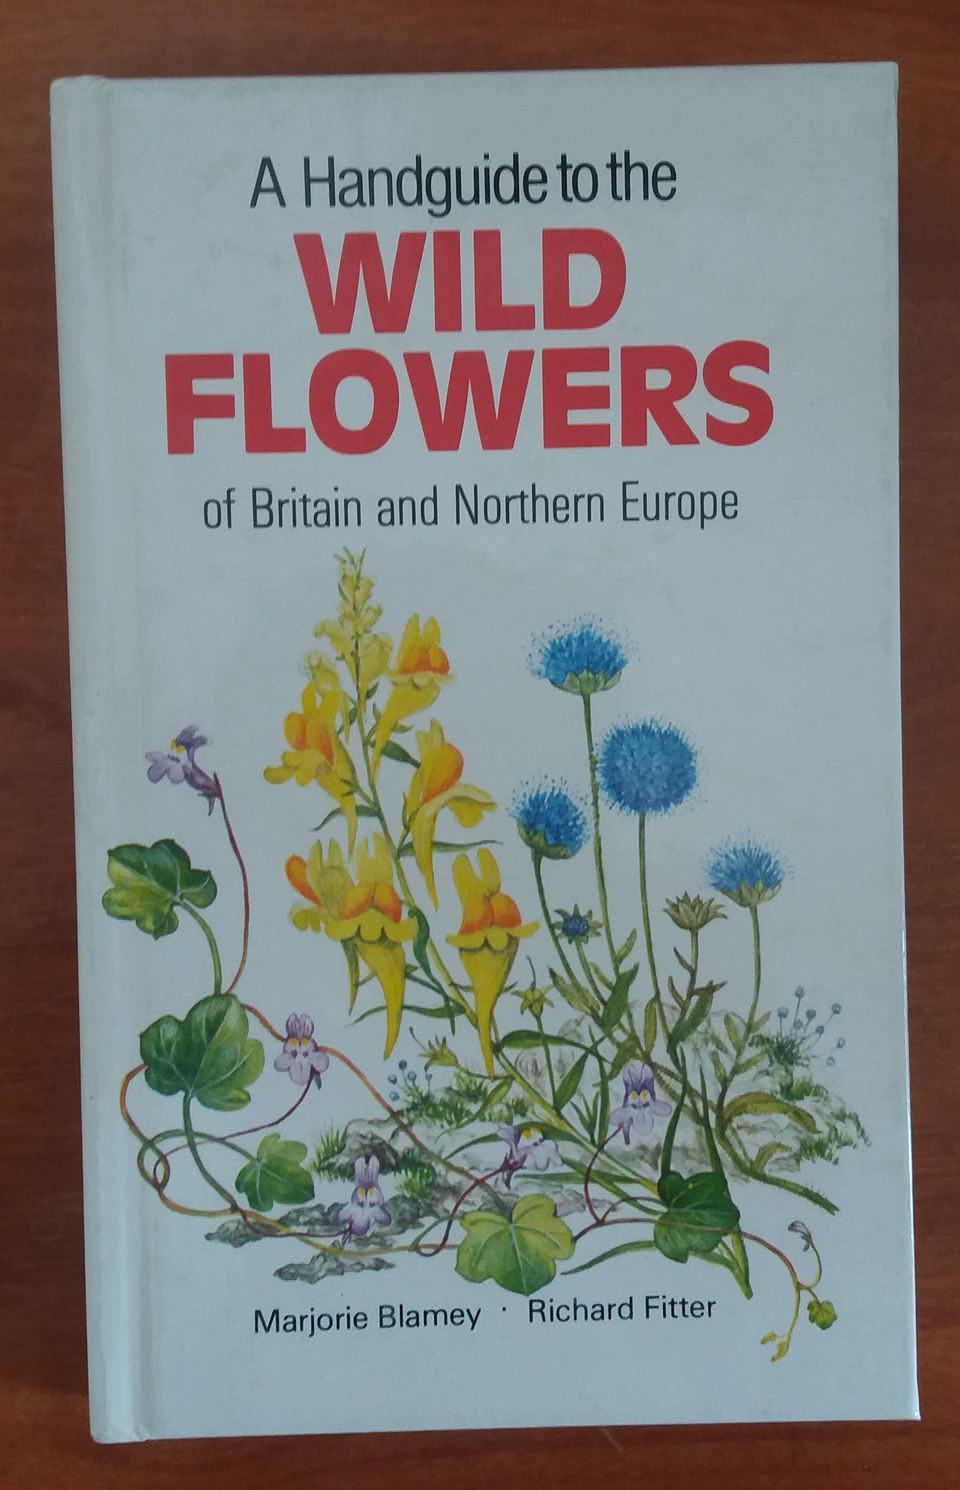 A Handguide to the WILD FLOWERS of Britain and Northern Europe